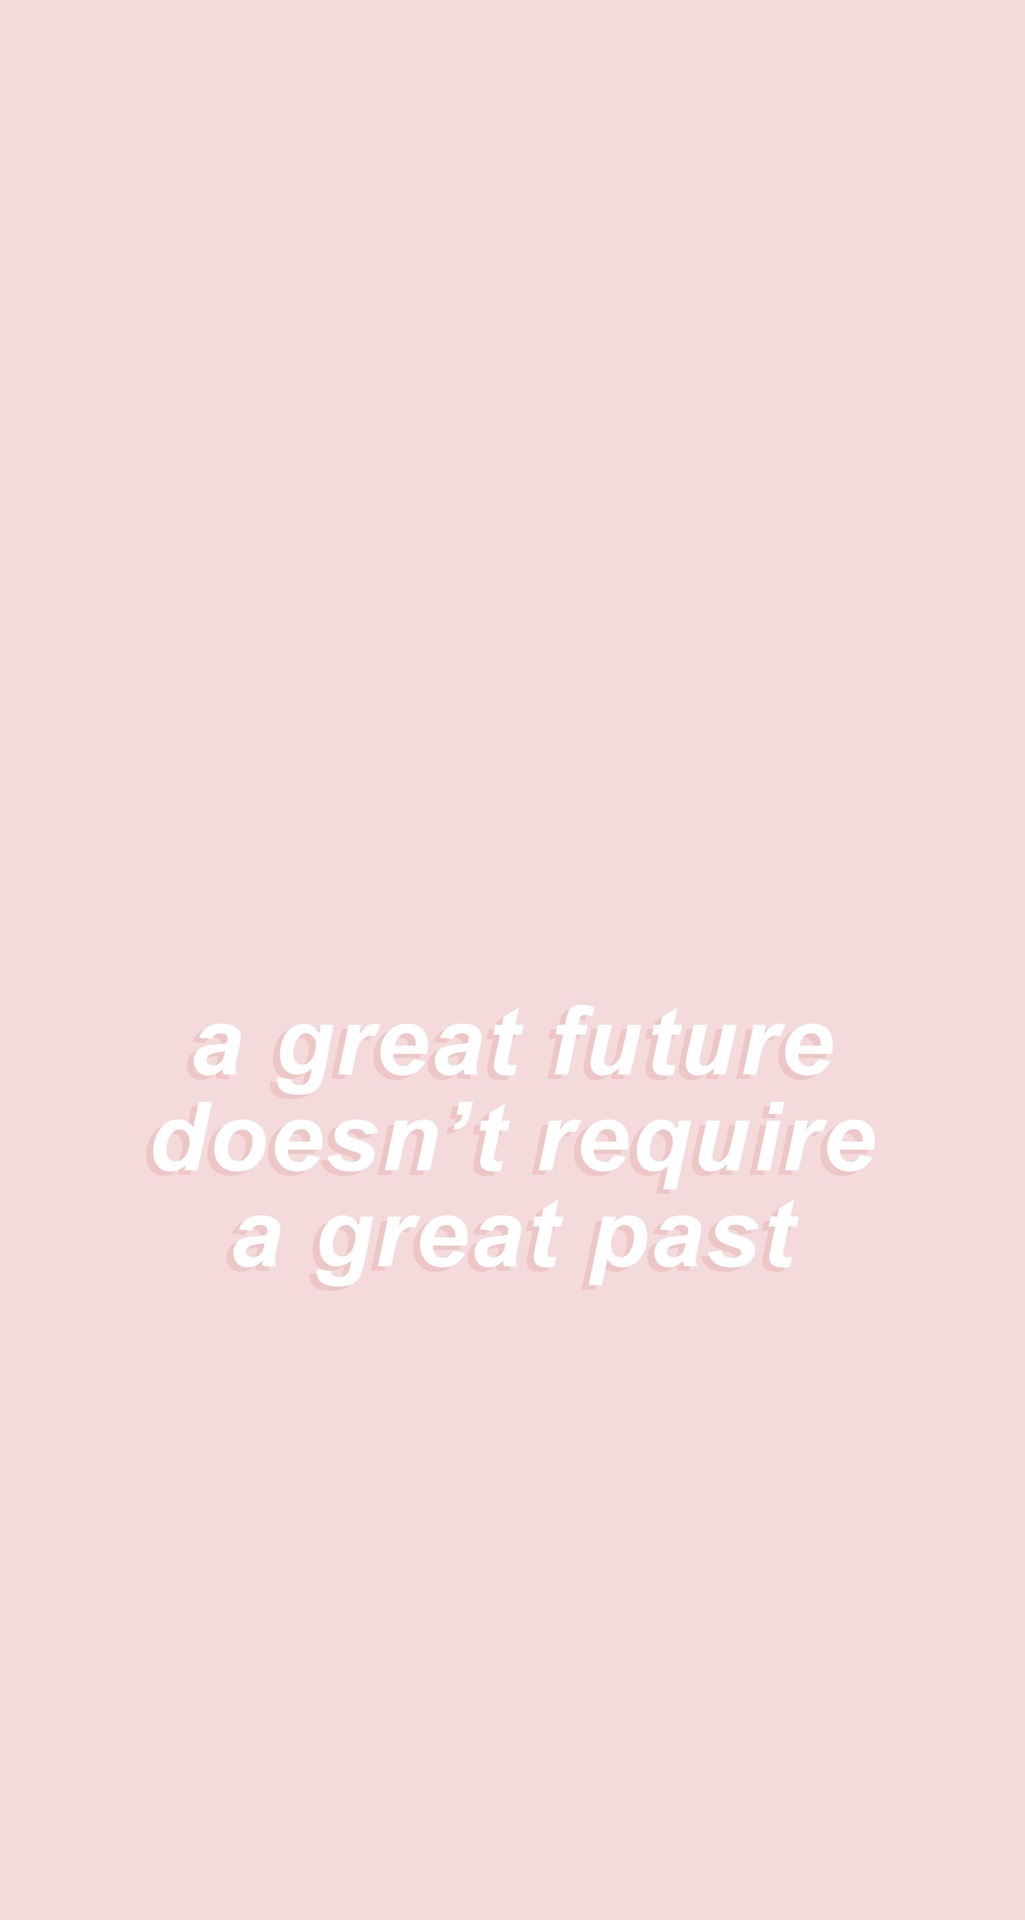 Cute Aesthetic Quotes Wallpaper Pastel Images 1280 | 2 Wallpaper